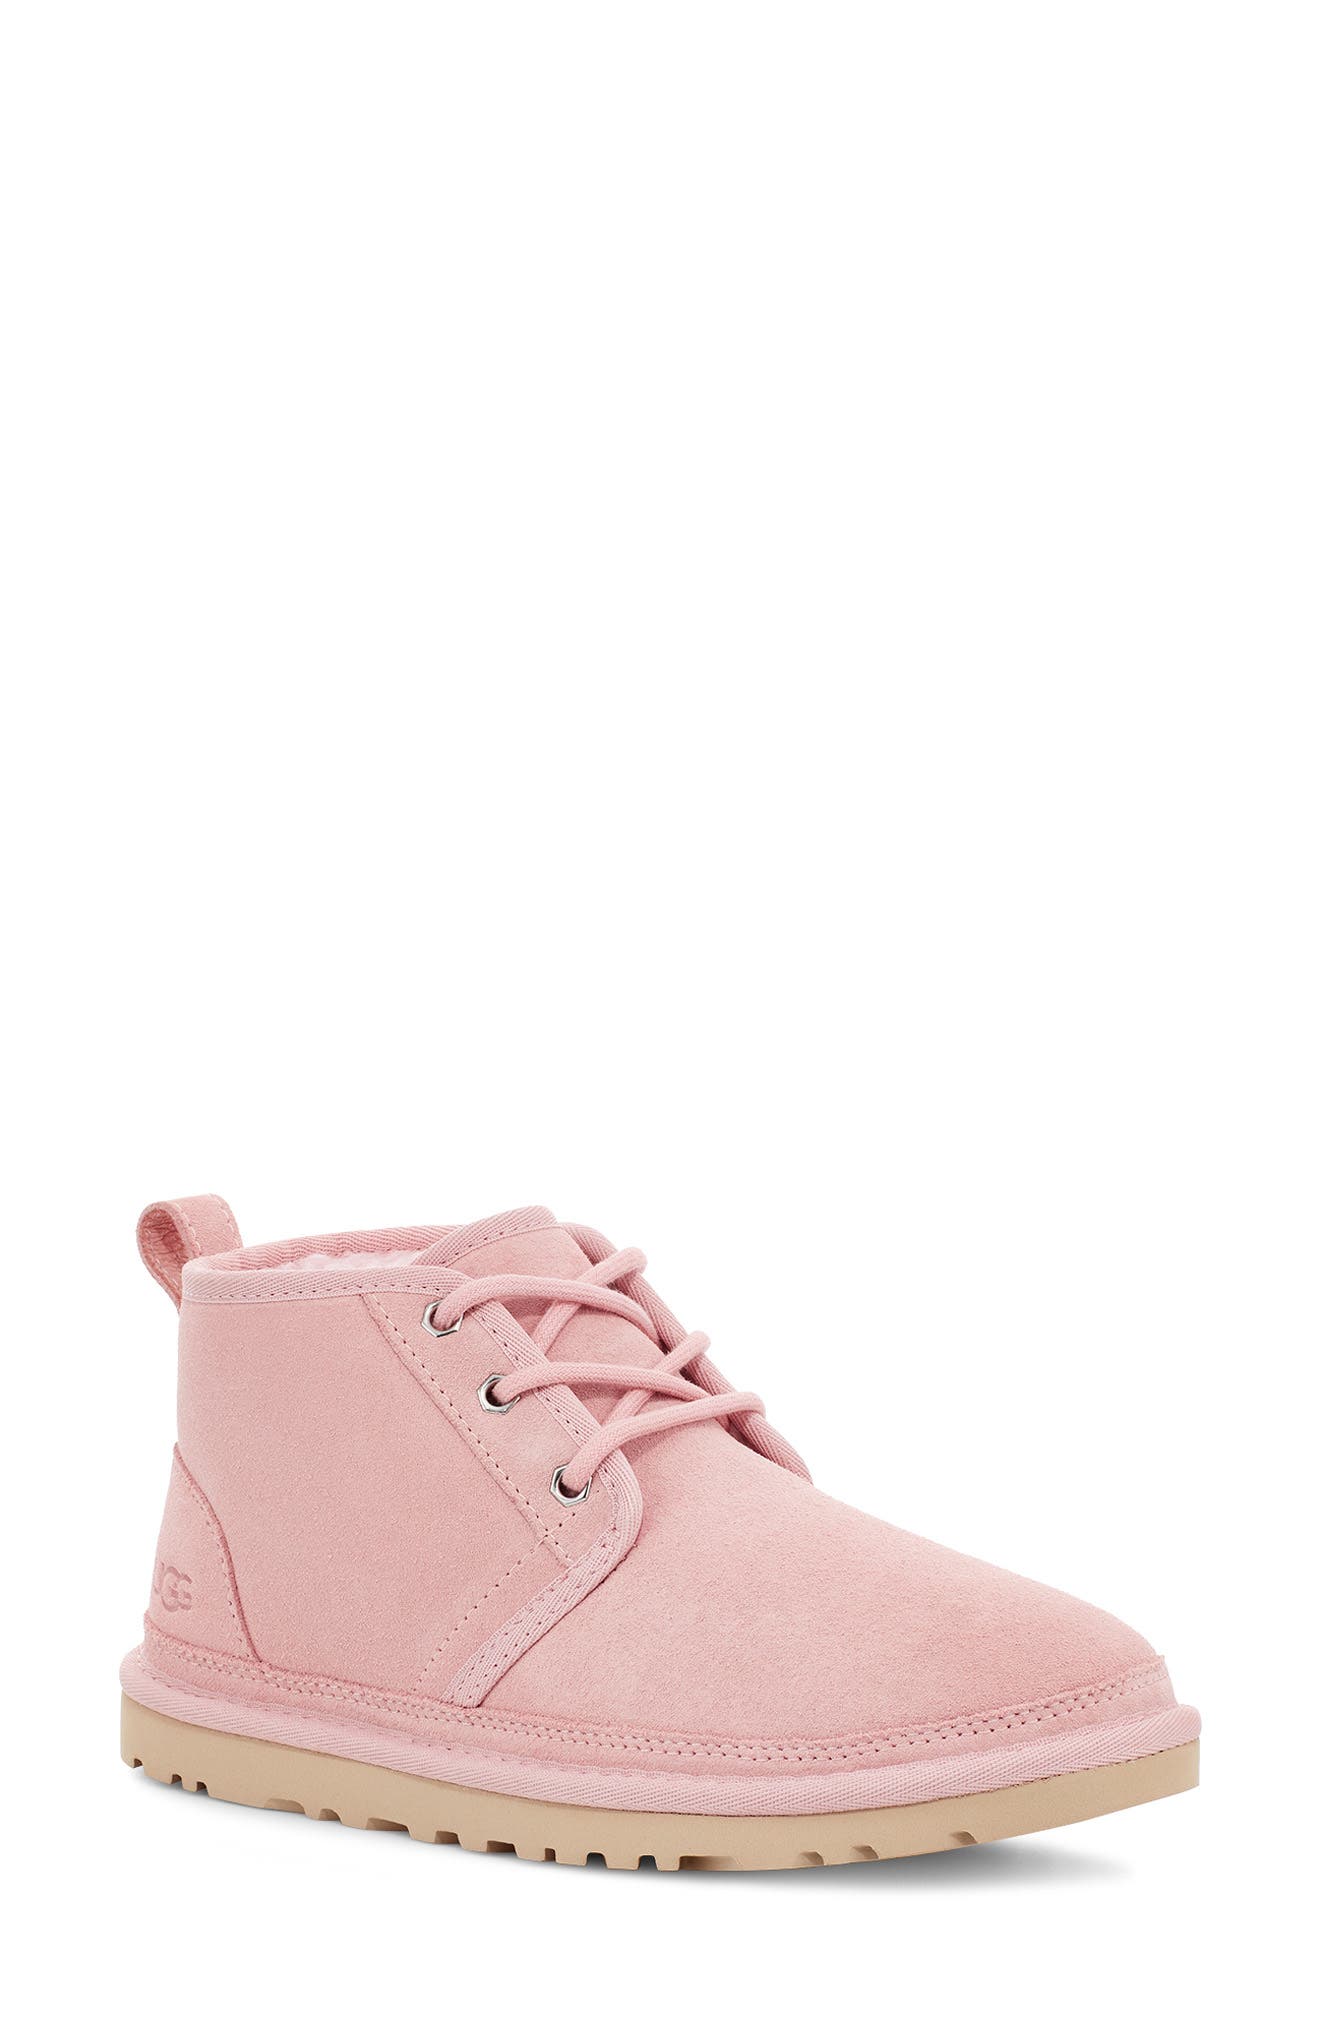 Ugg Neumel Faux Fur Lined Chukka Boot In Pink Cloud Suede